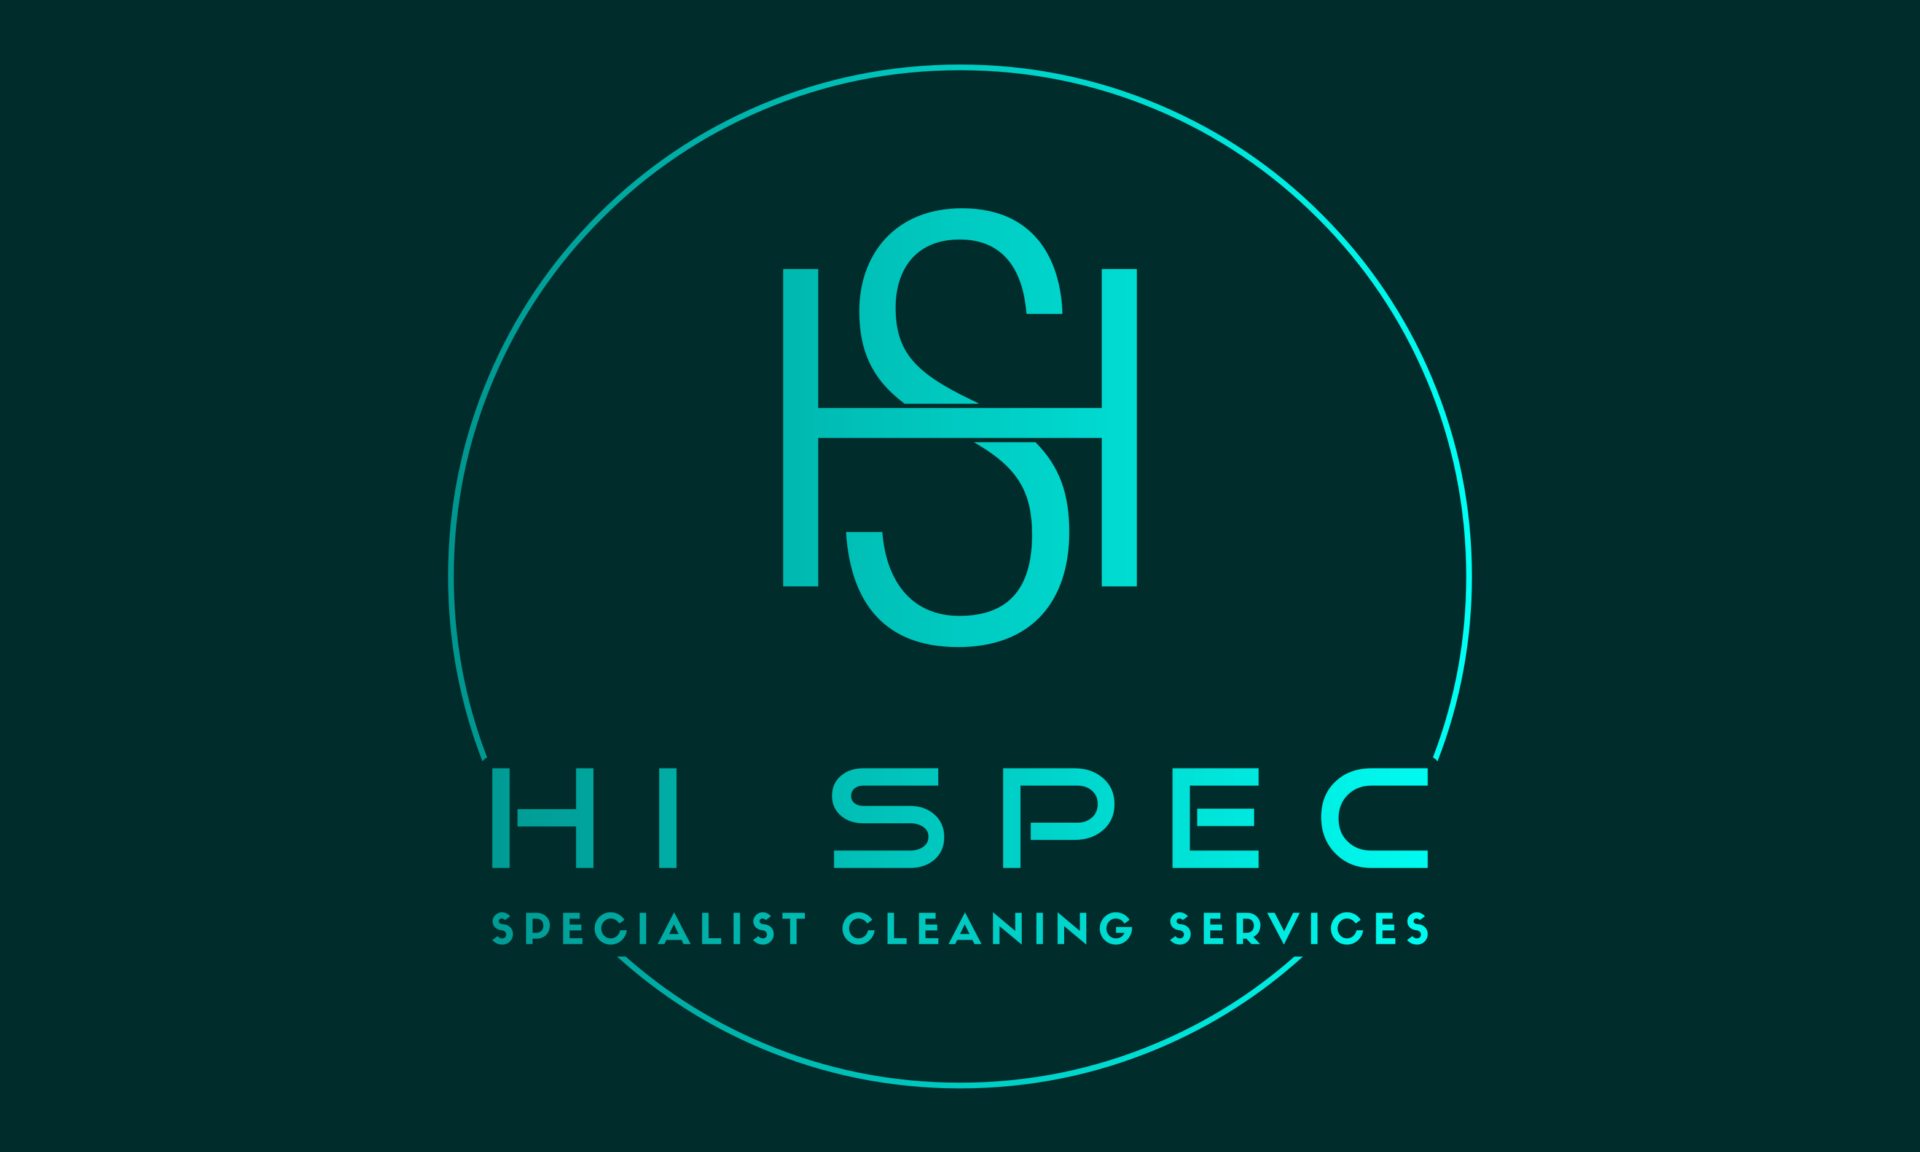 Hi-Spec Specialist Cleaning Services